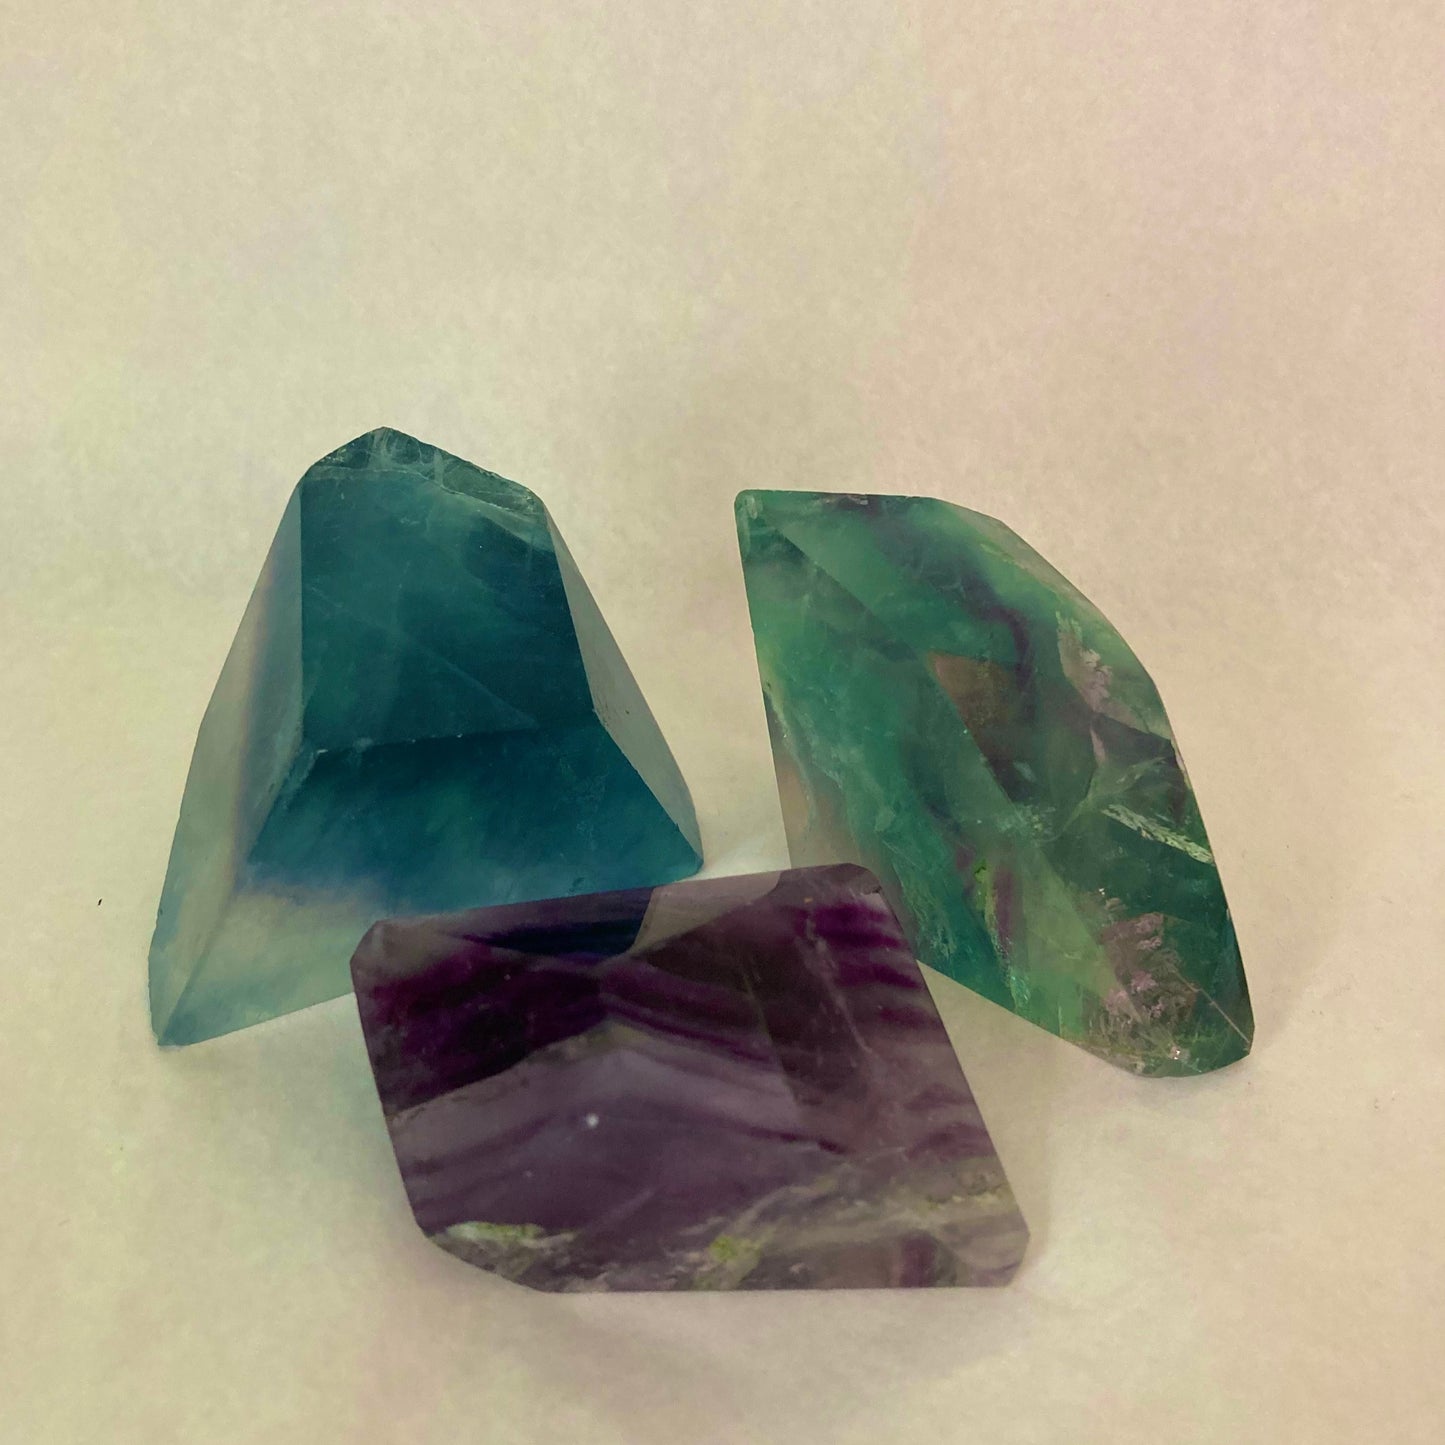 Fluorite Free Forms - Green and Purple